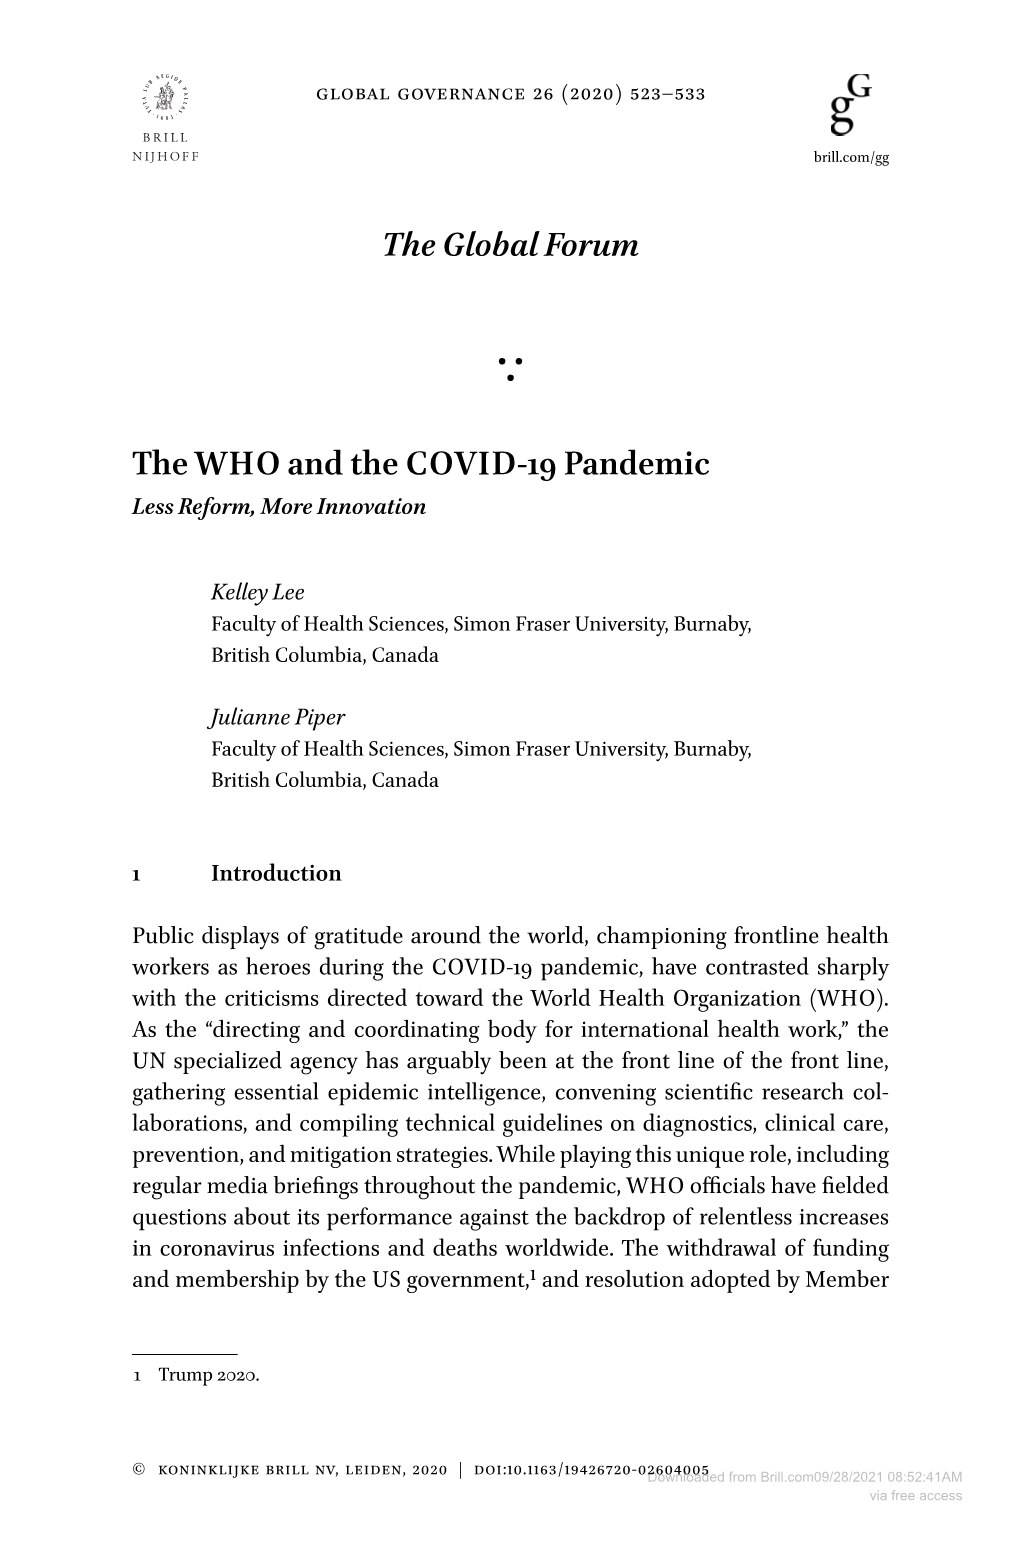 Theglobalforum Thewho and the COVID-19 Pandemic